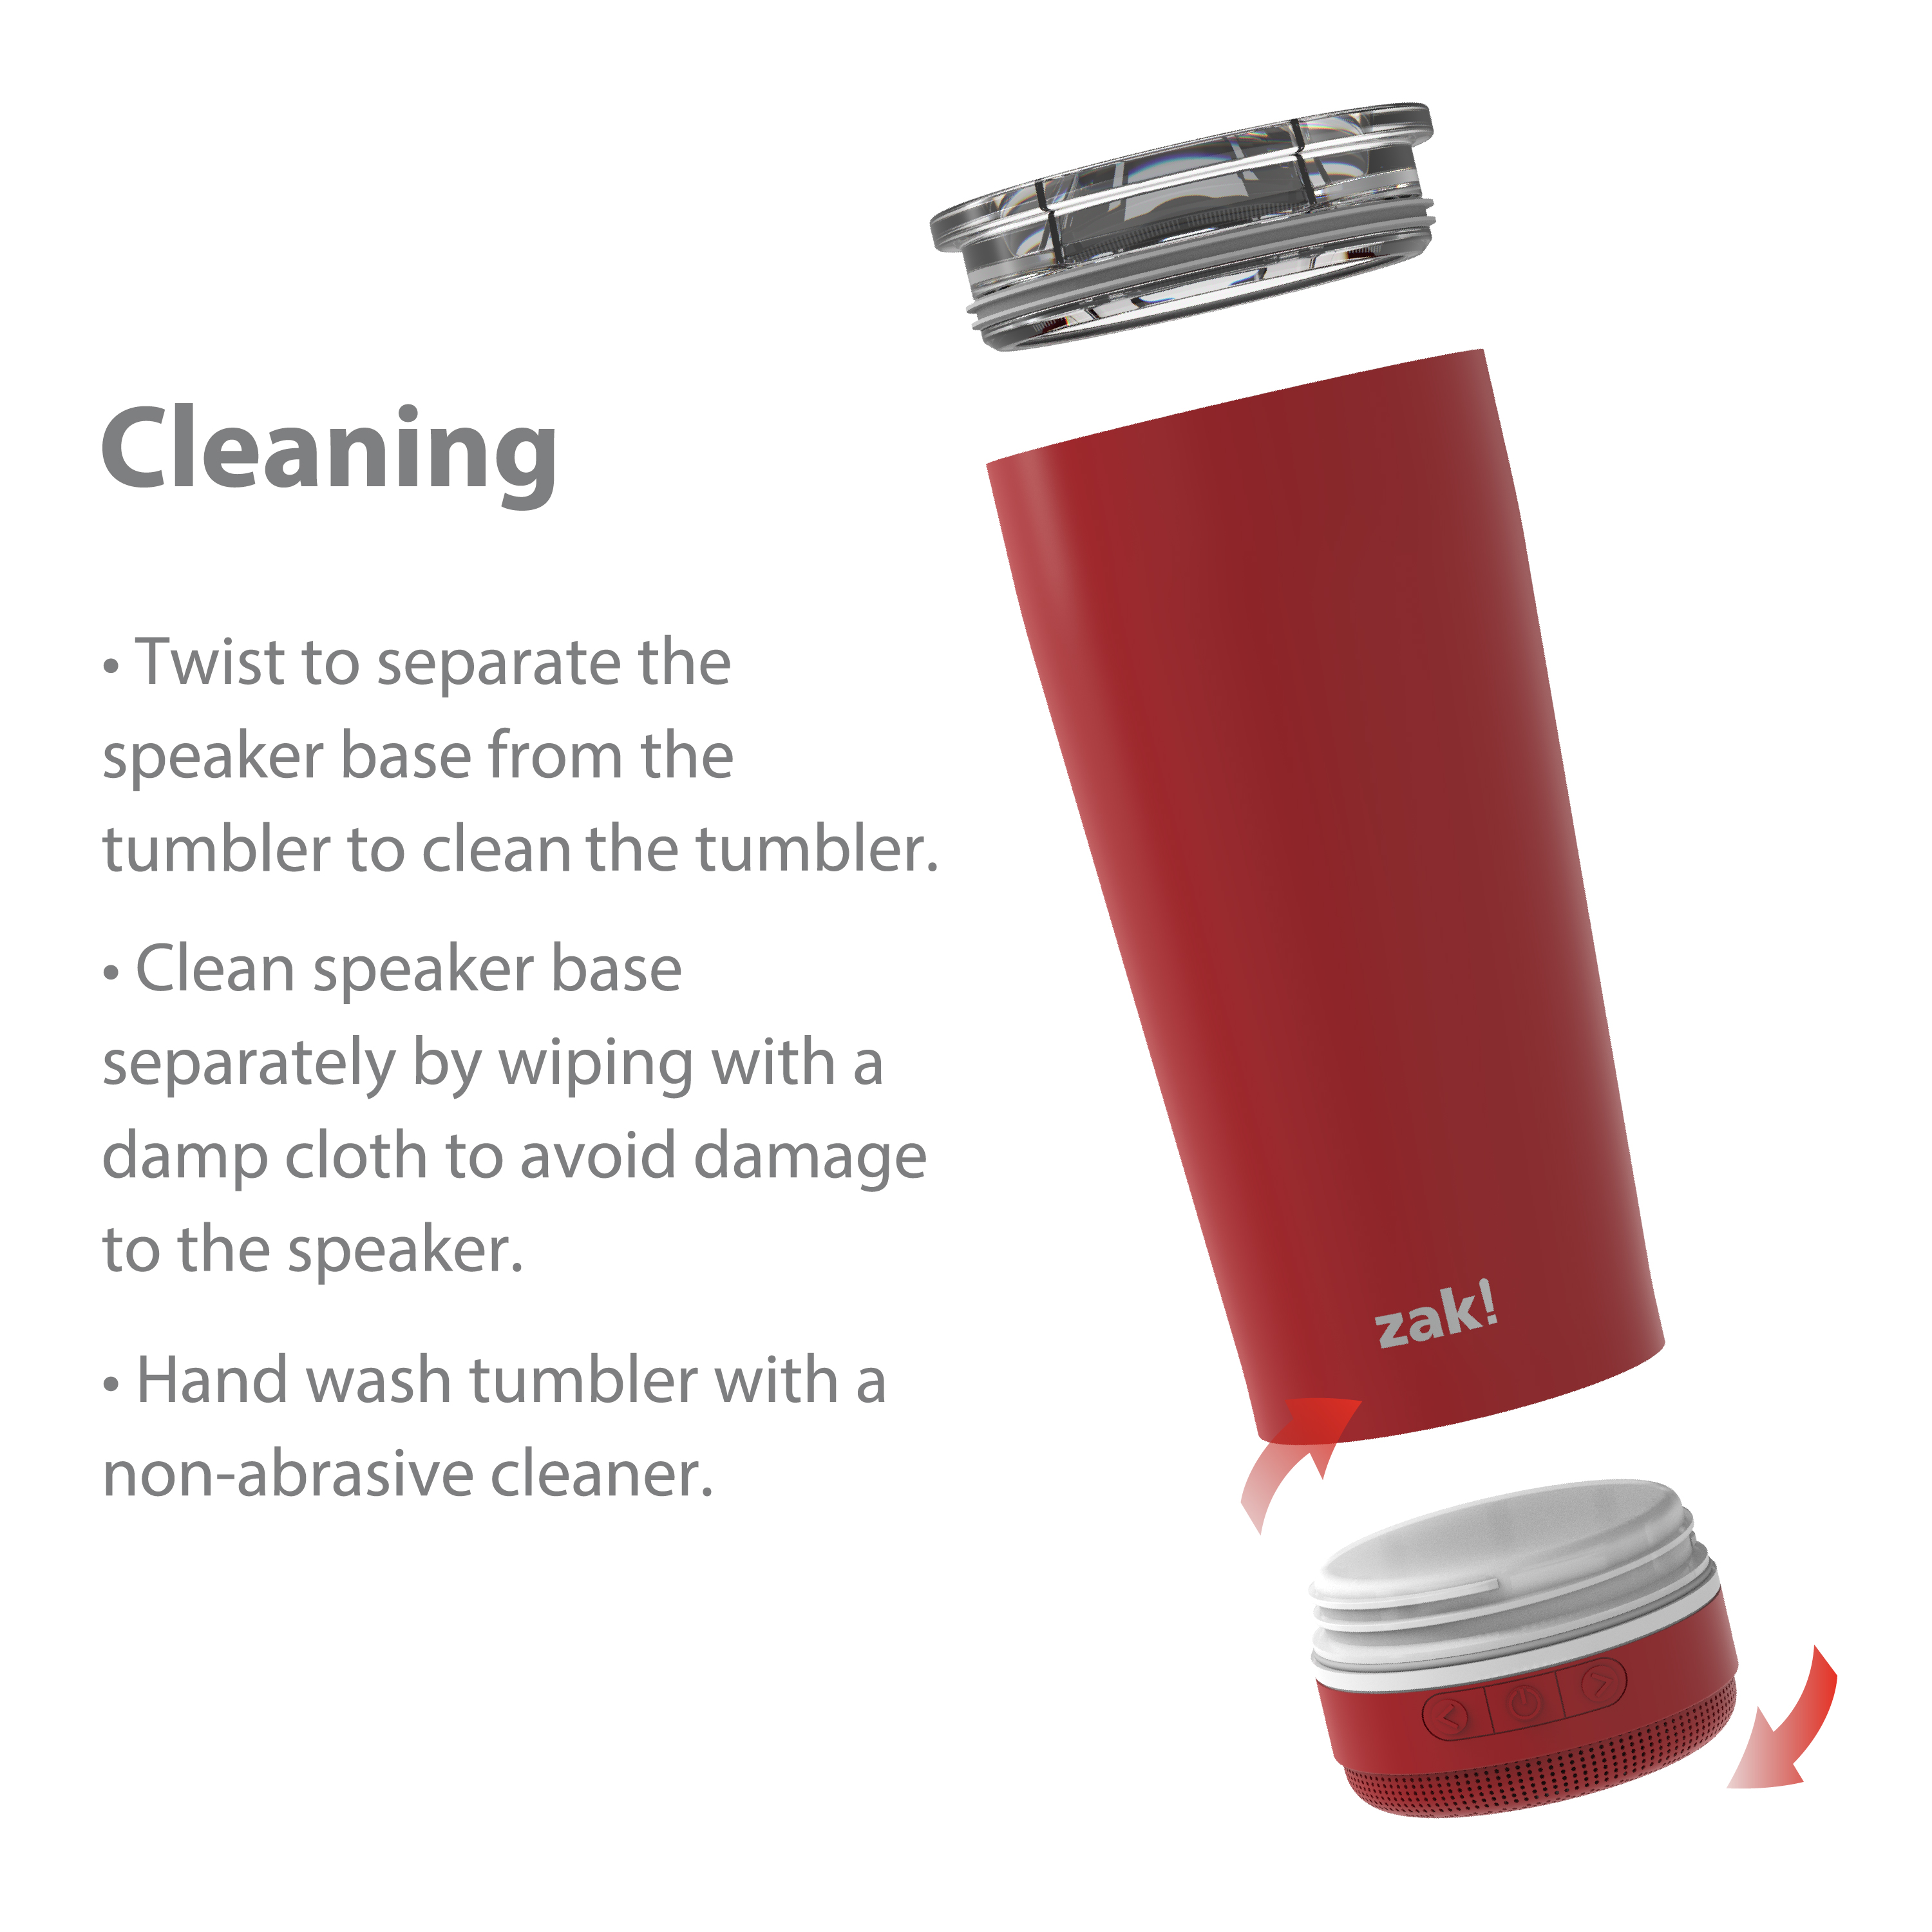 Zak Play 18 ounce Stainless Steel Tumbler with Bluetooth Speaker, Red slideshow image 11